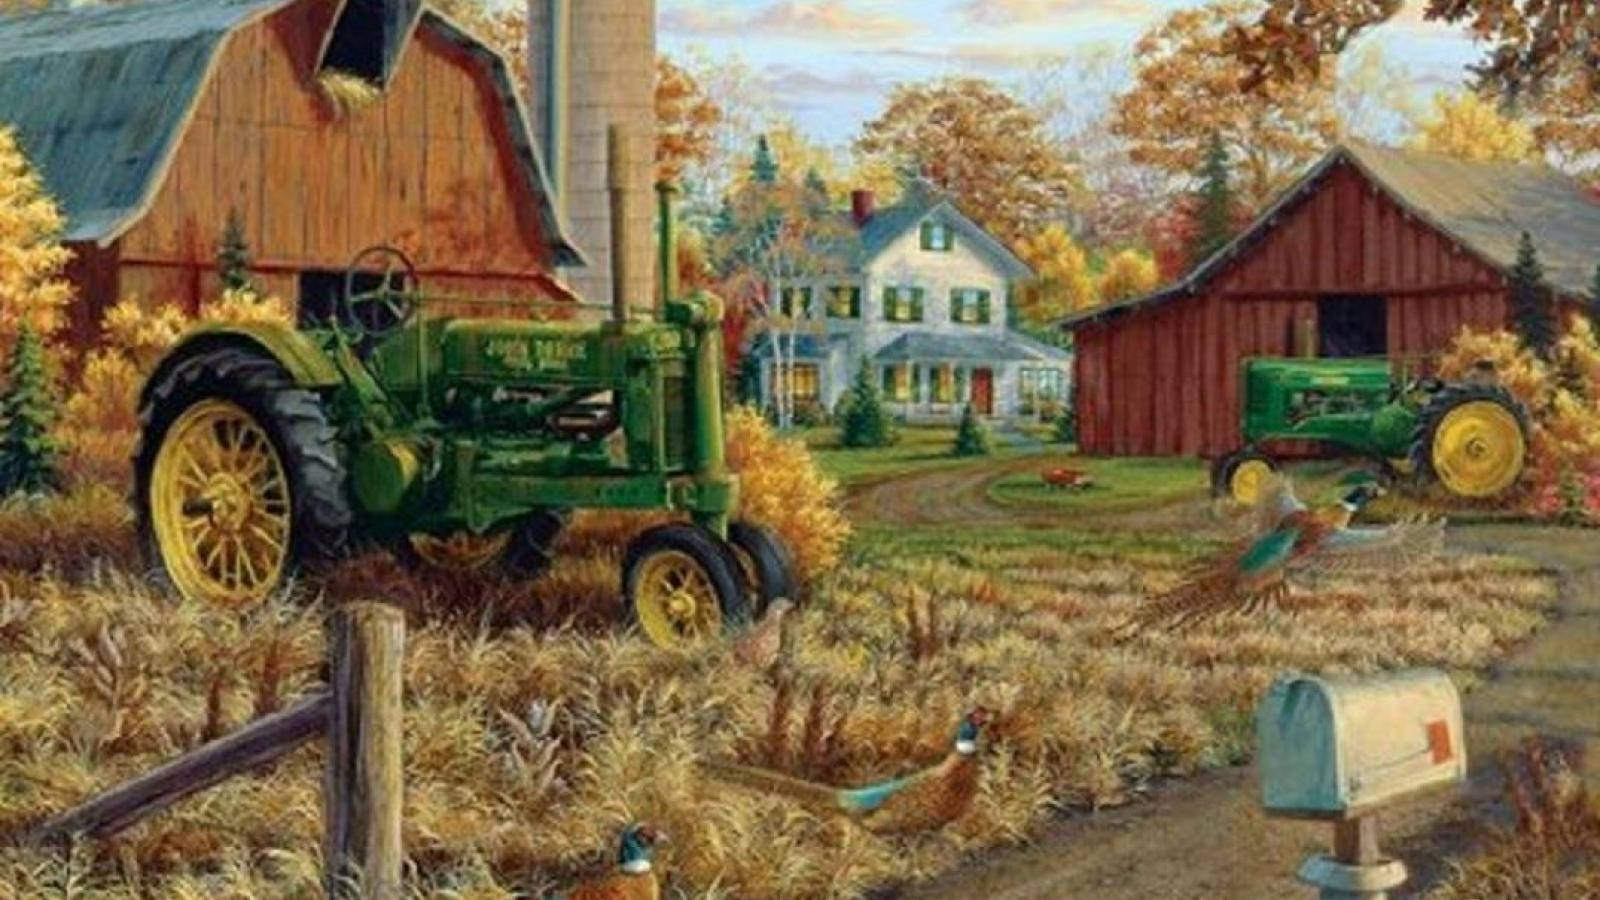 Farmhouse With Green Tractors Wallpaper